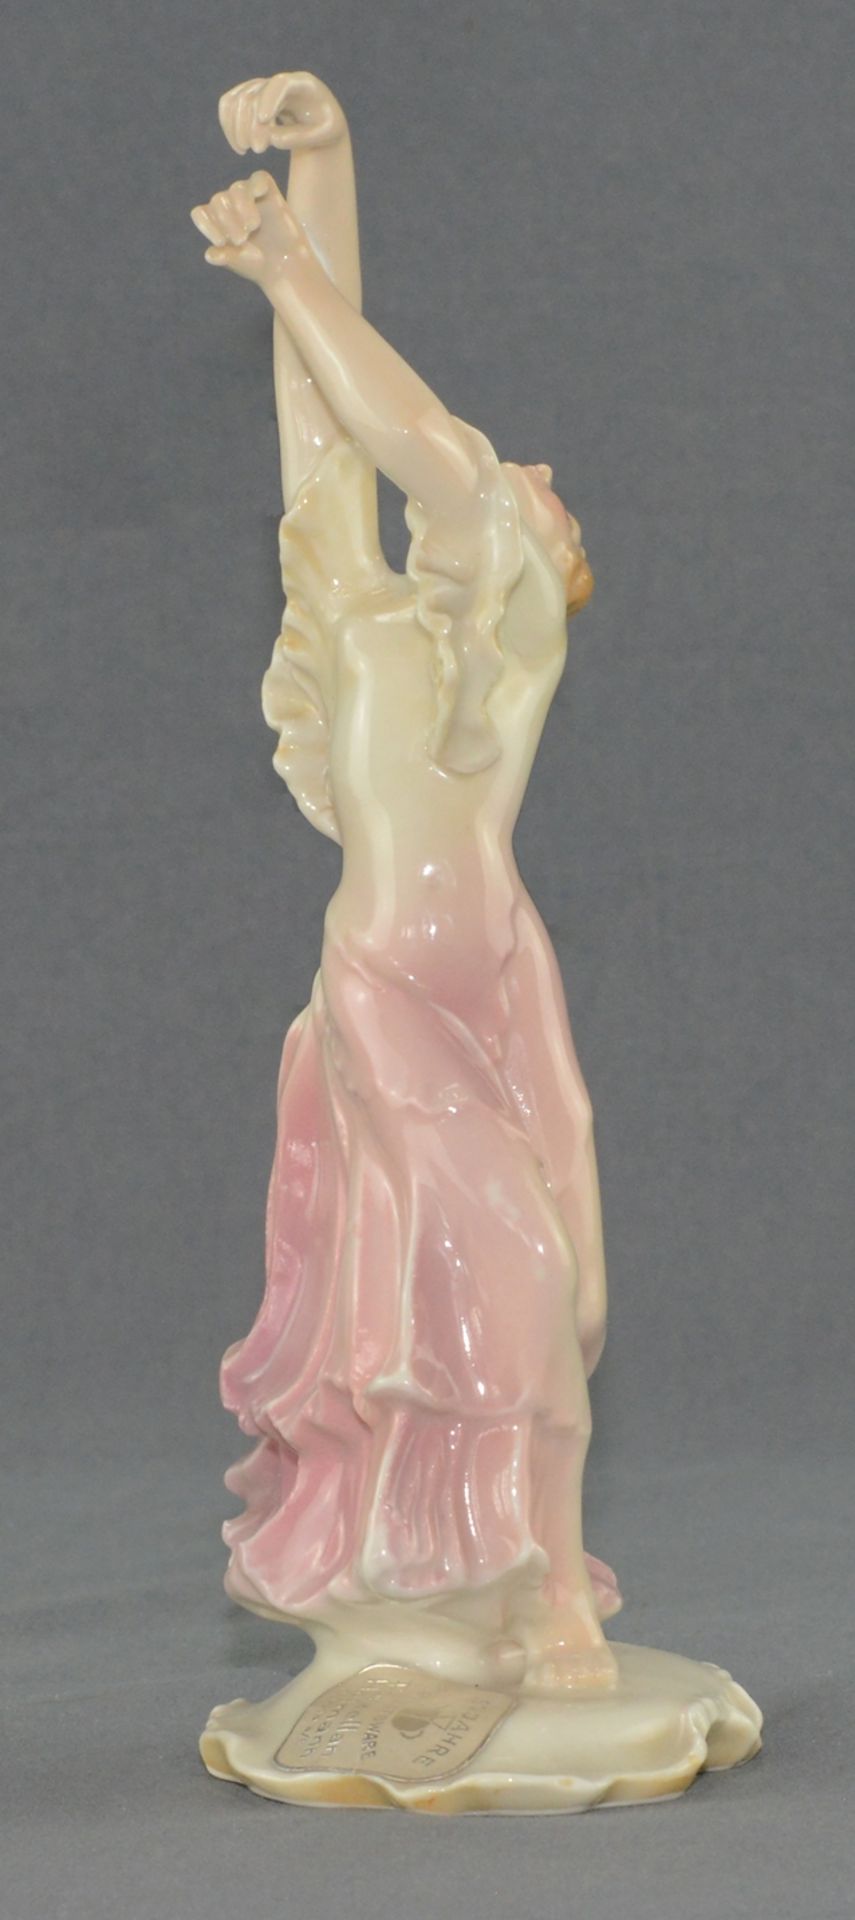 Dancer, in dramatic pose, on curved base, finely polychrome painted, Ens, 20th century, height 21cm - Image 4 of 8